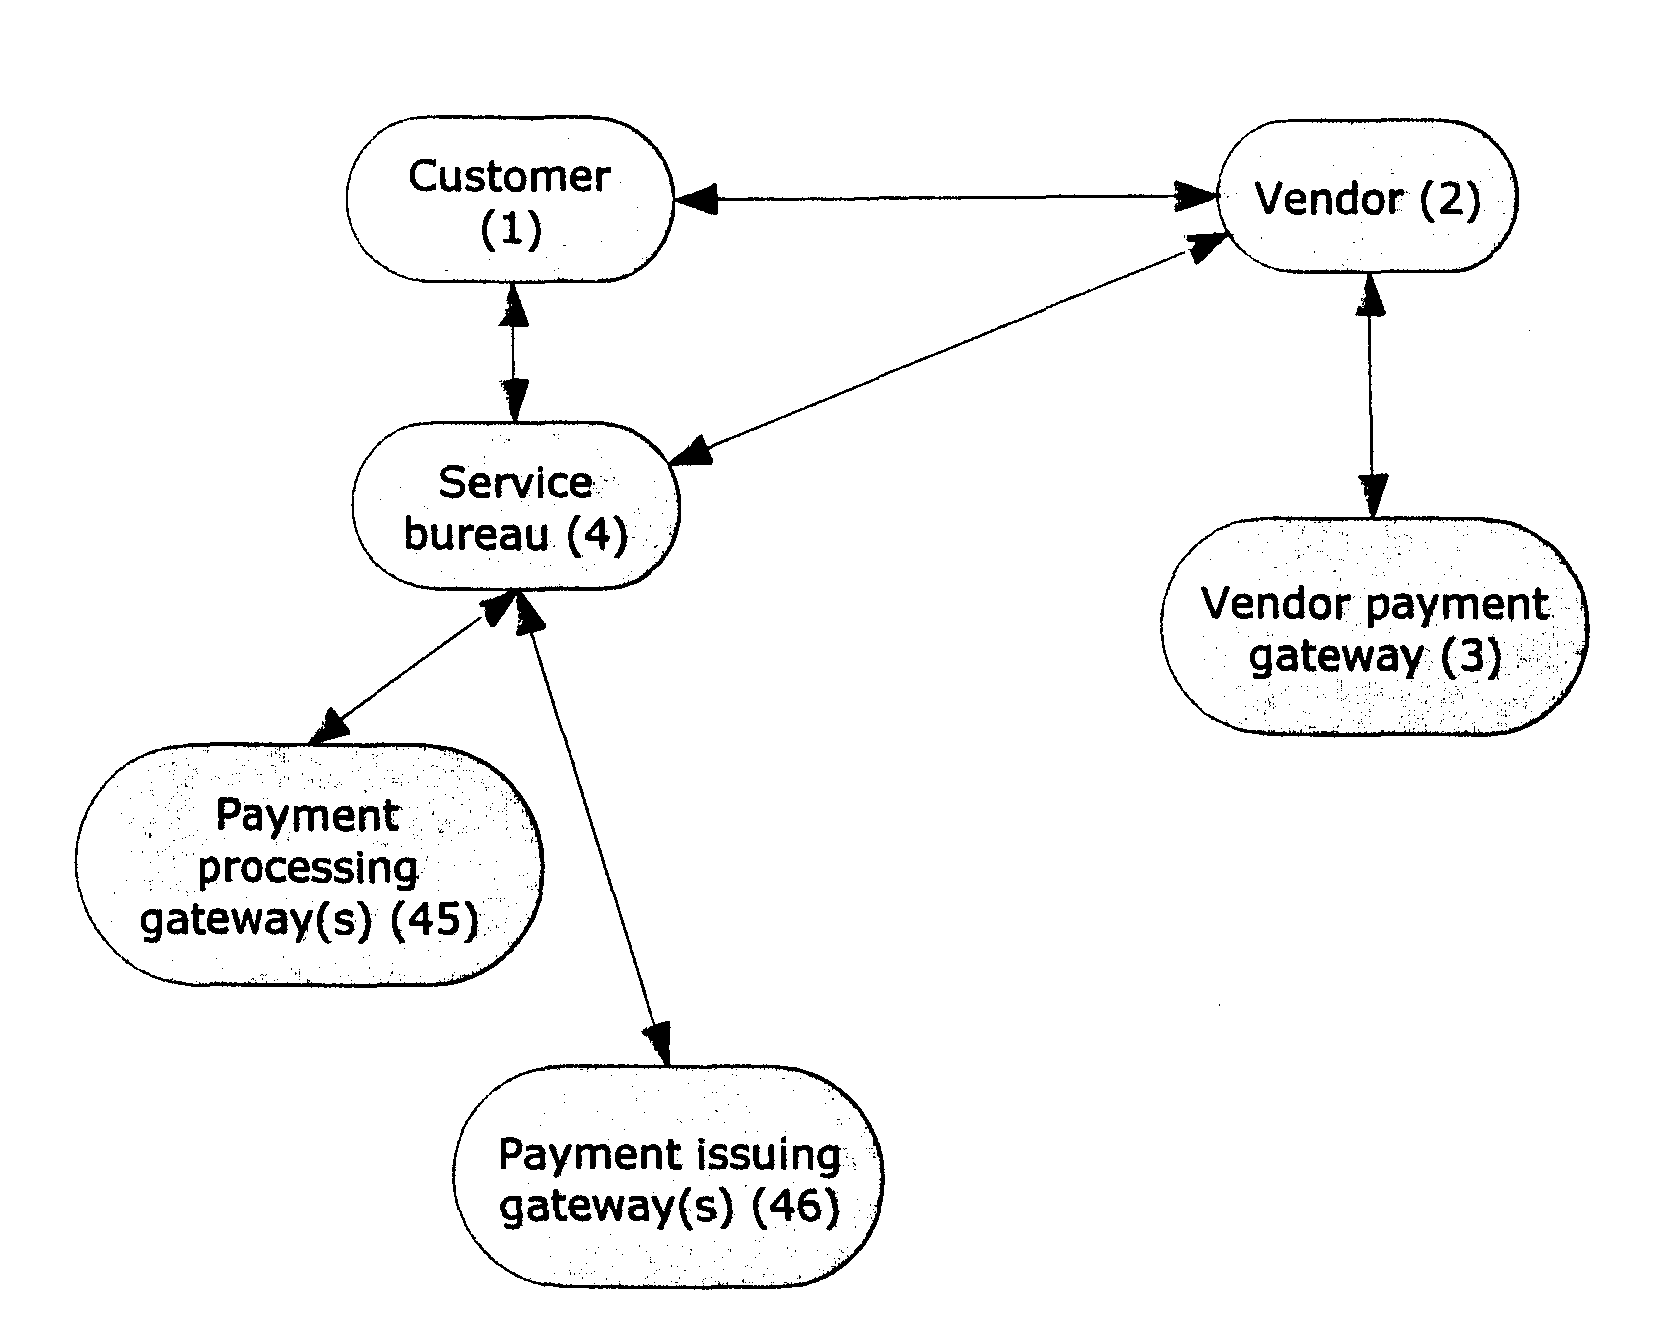 Facilitating e-commerce payments using non-accepted customer payment methods